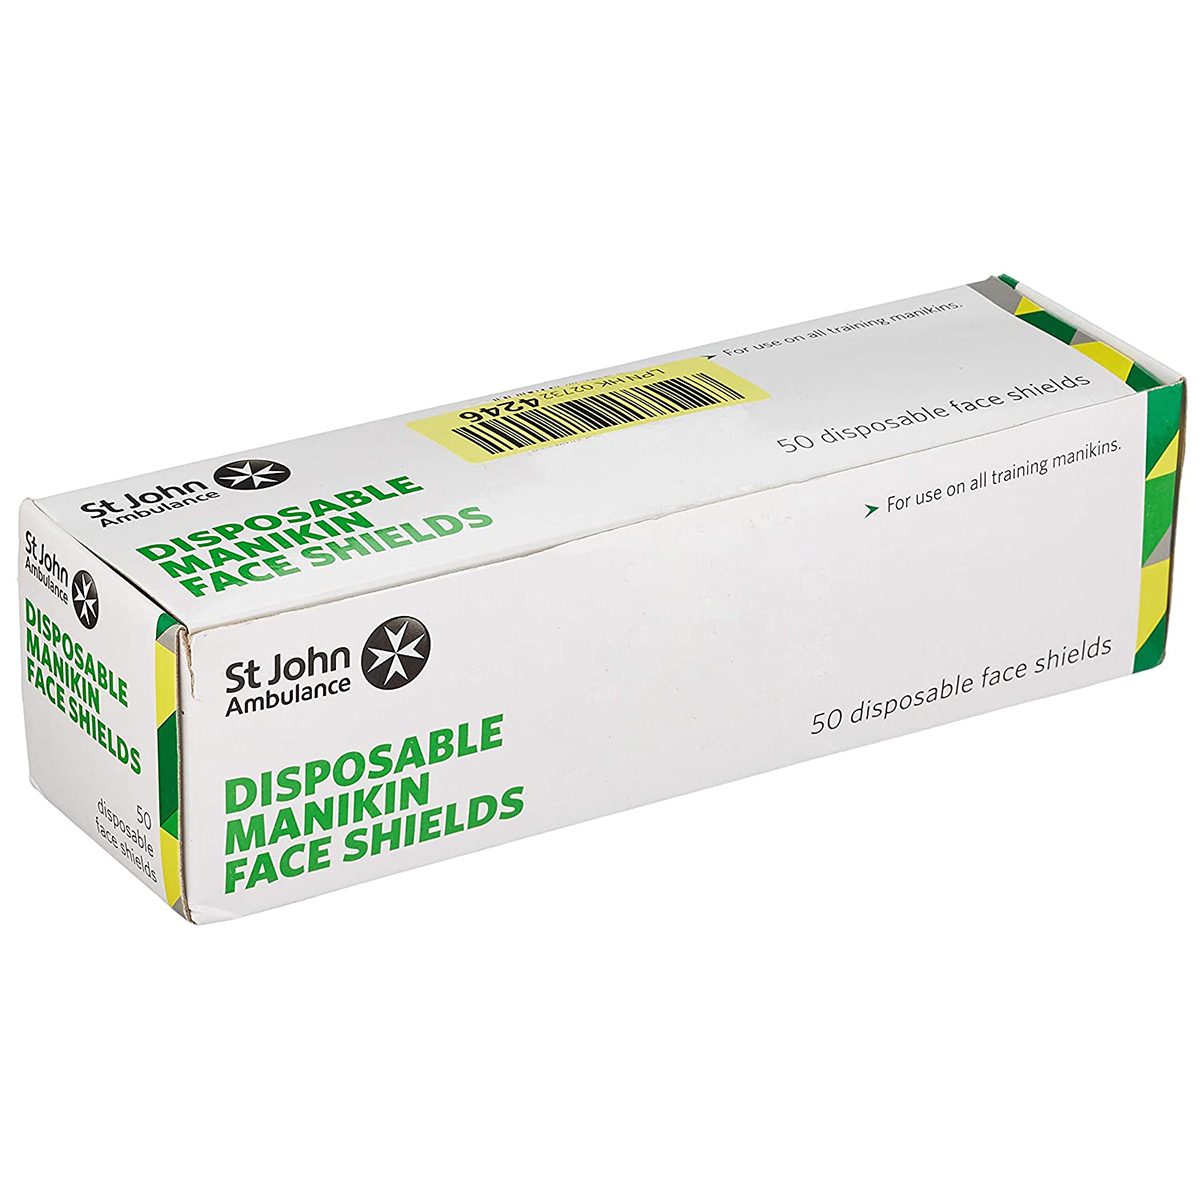 Roll of 50 St John Ambulance Disposable Face Shields